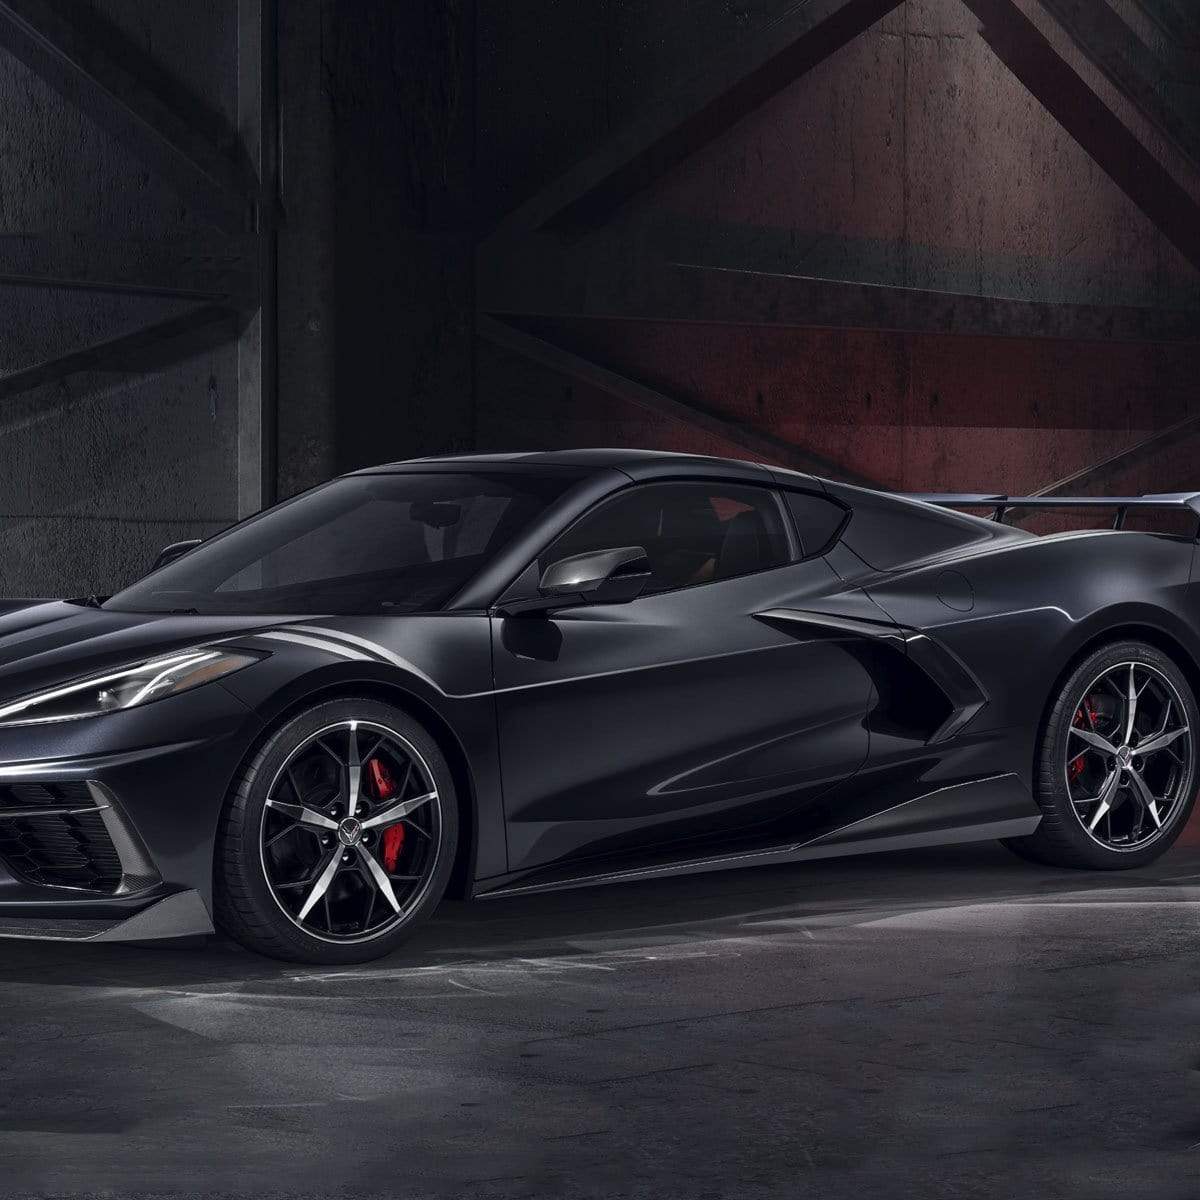 ACS Composite C8 Visible Carbon Fiber 5VM Package (SKU nan) for Corvette Stingray - Front Splitter and Side Rockers with integrated winglets for improved airflow and performance.